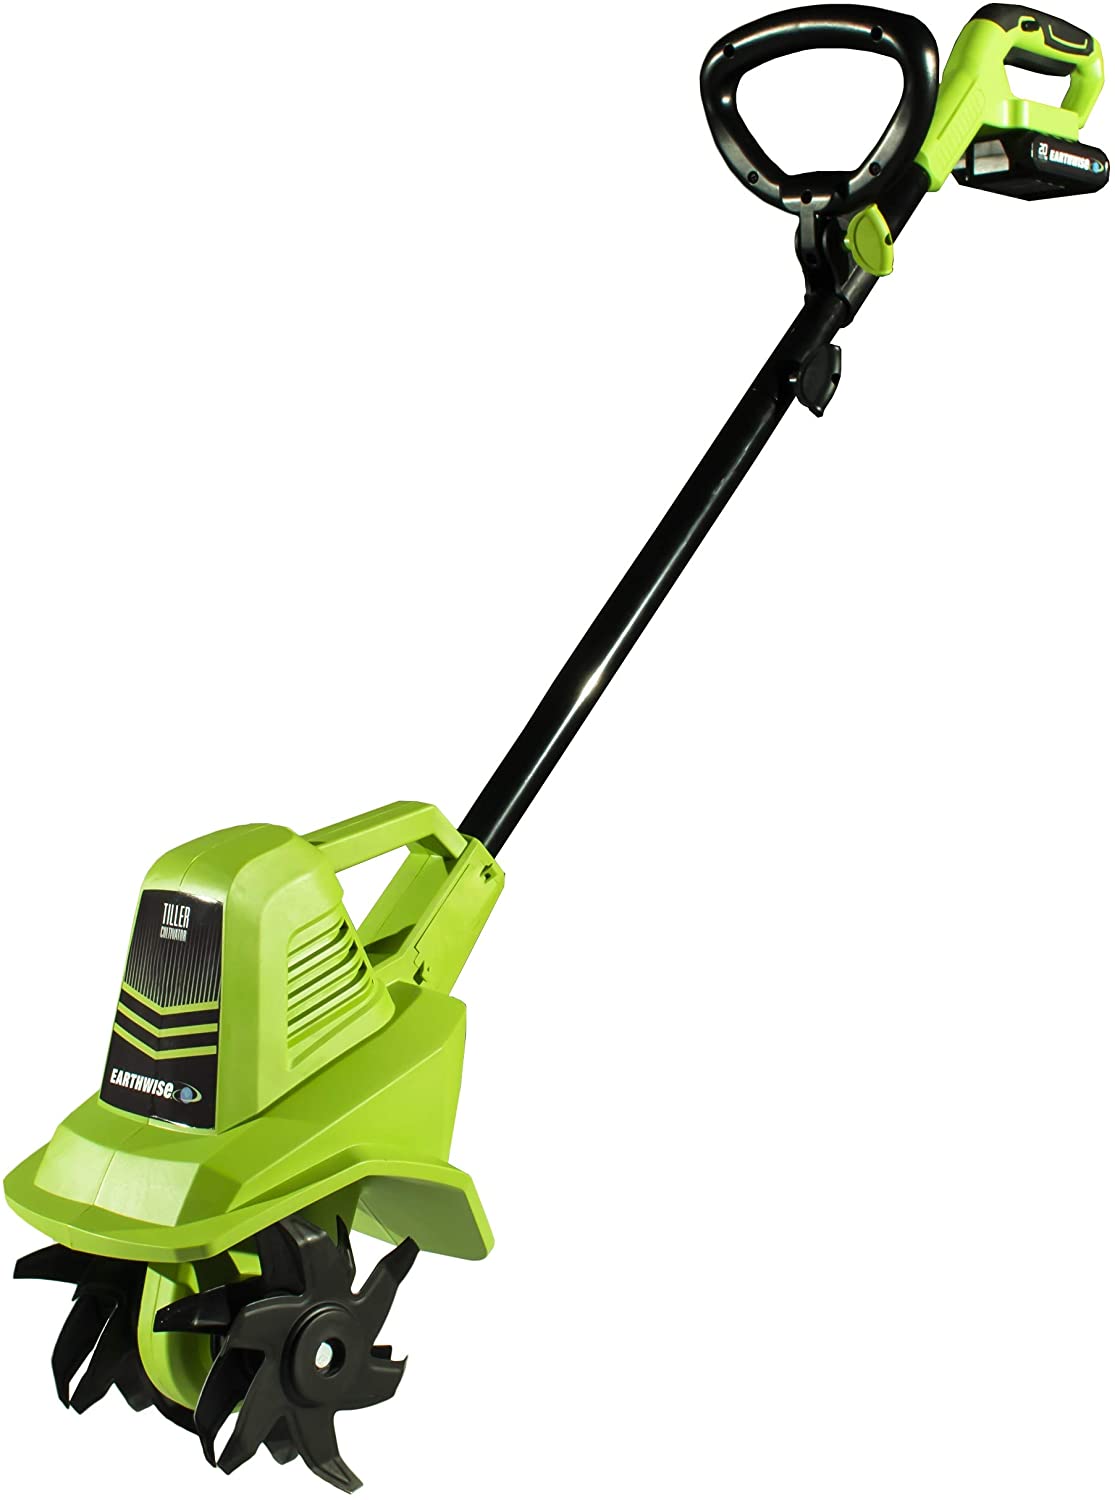 Earthwise TC70020 Cordless Electric Cultivator